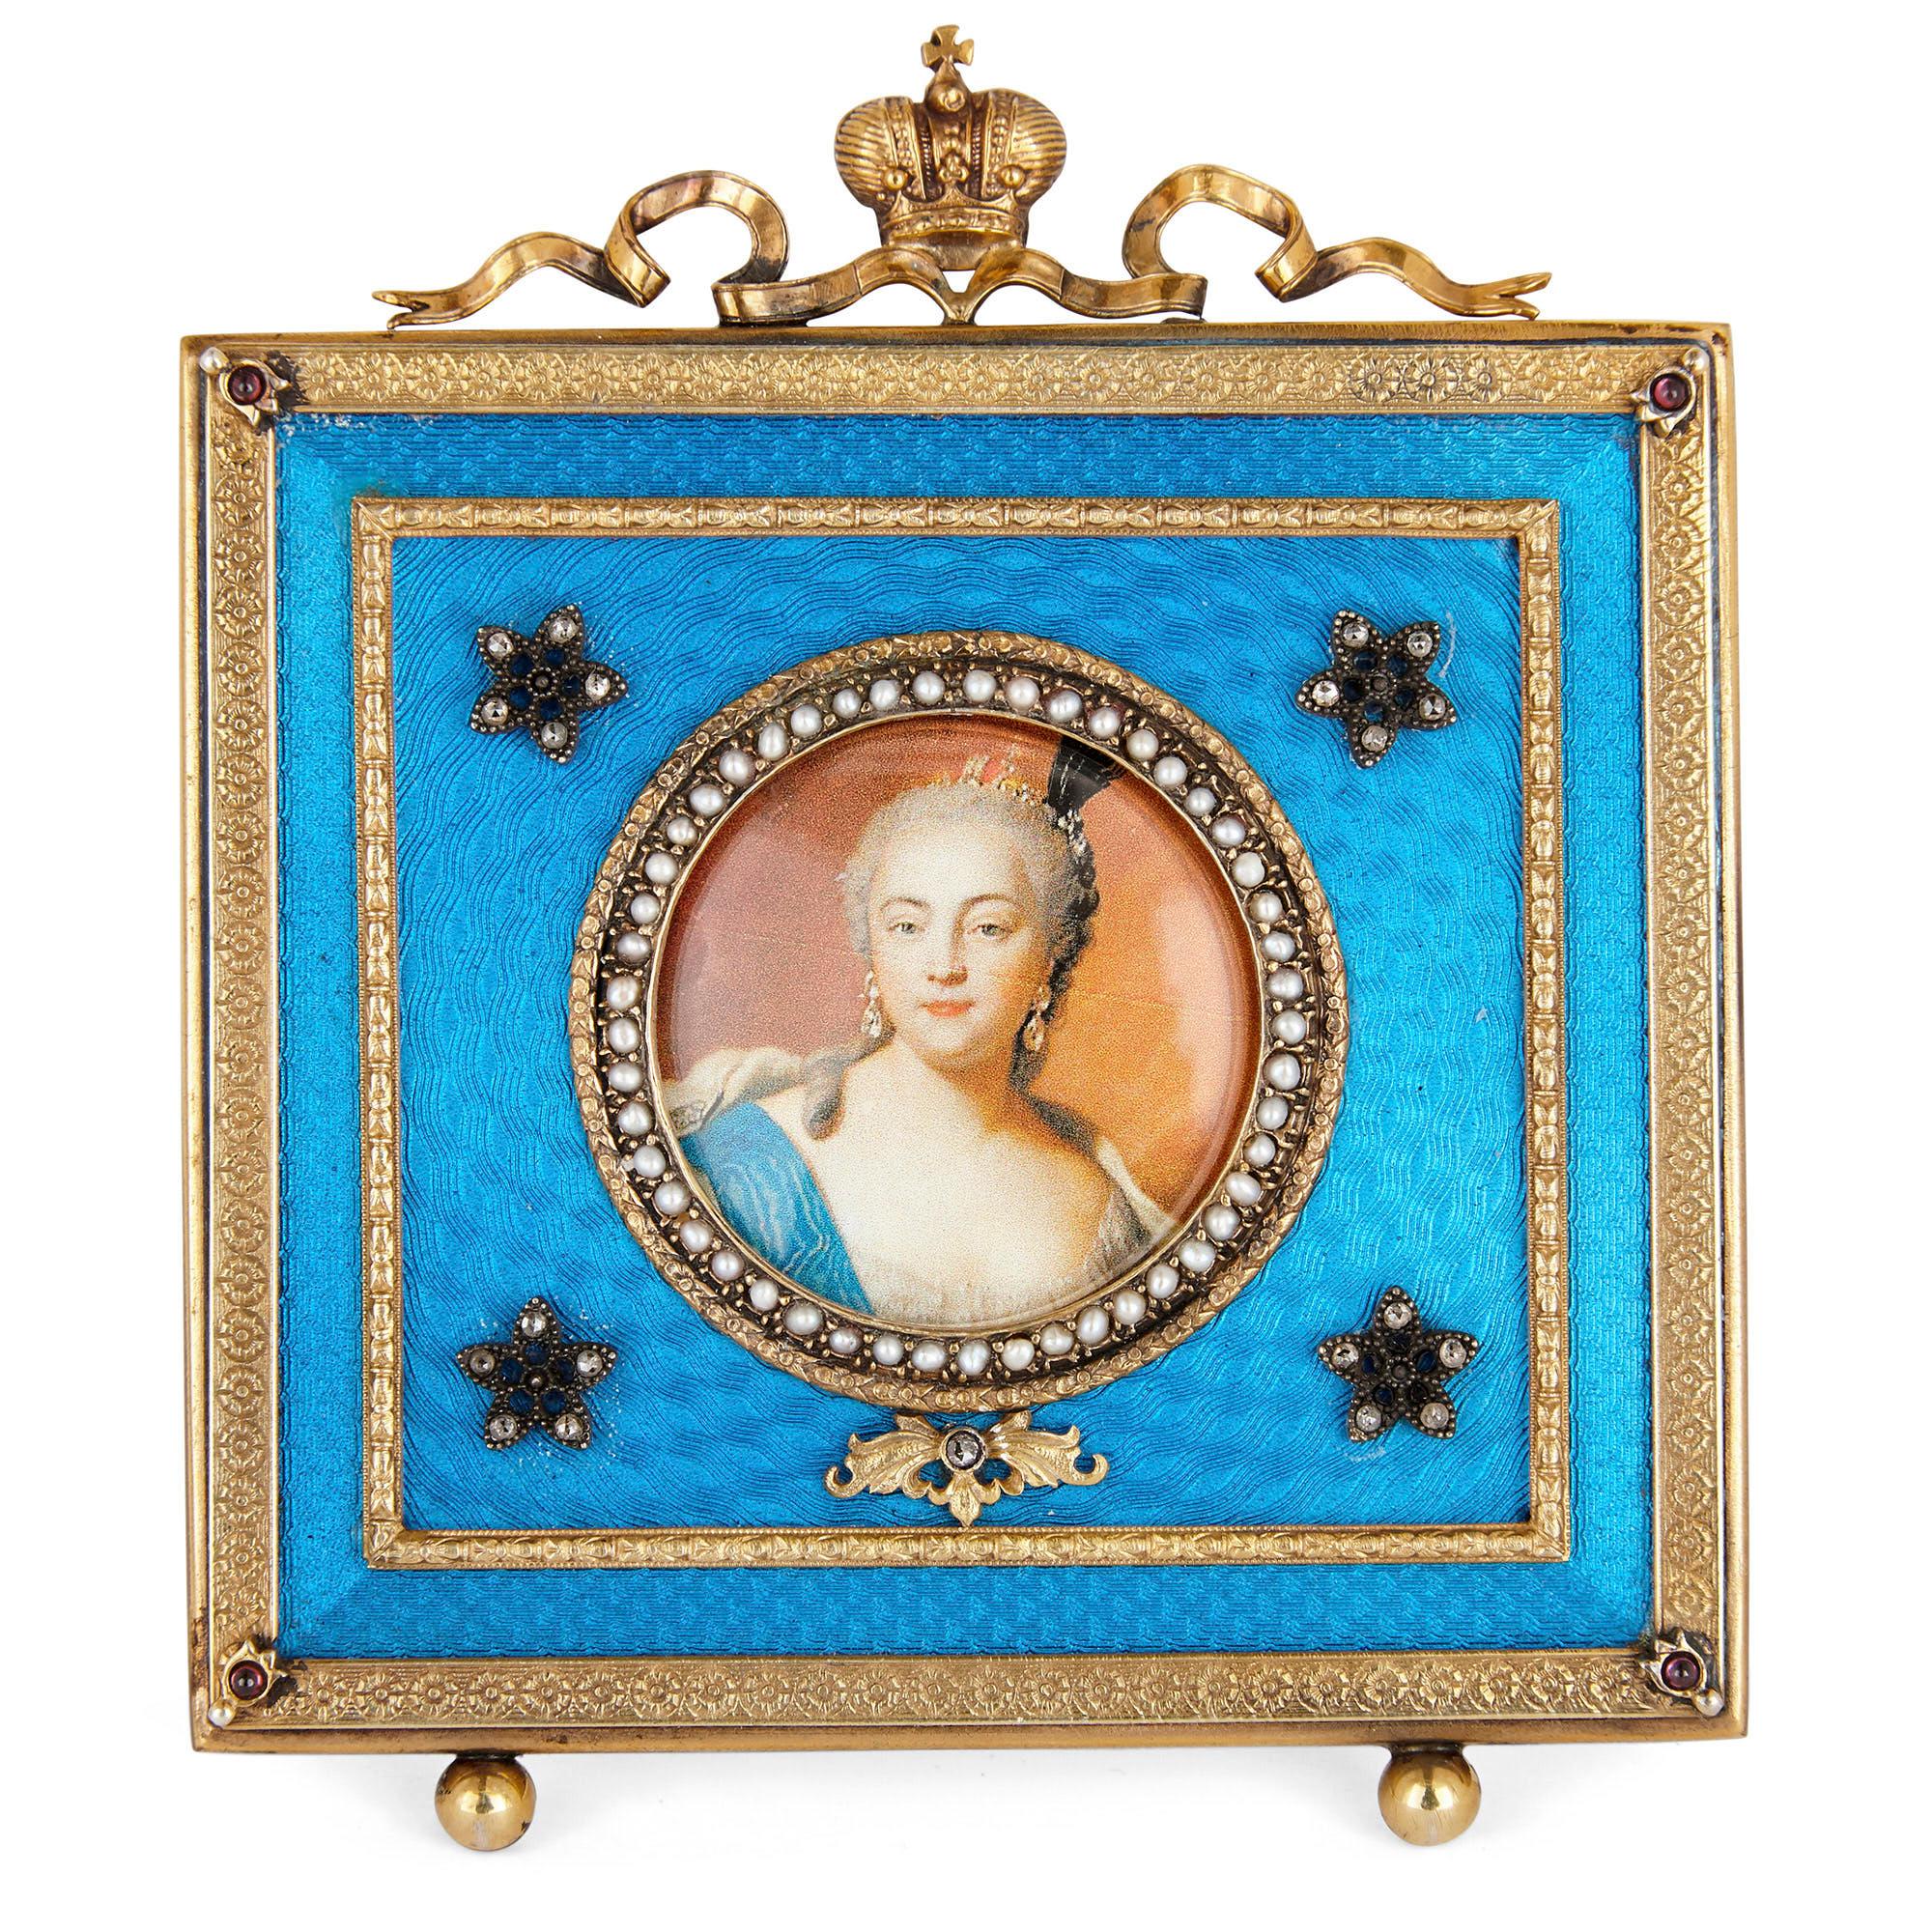 This picture frame is designed in the style of the famed Russian jeweller Fabergé. The frame is rectangular in profile with a surface profusely ornamented with brilliant blue guilloche enamel. The frame is edged along its exterior with vermeil (or